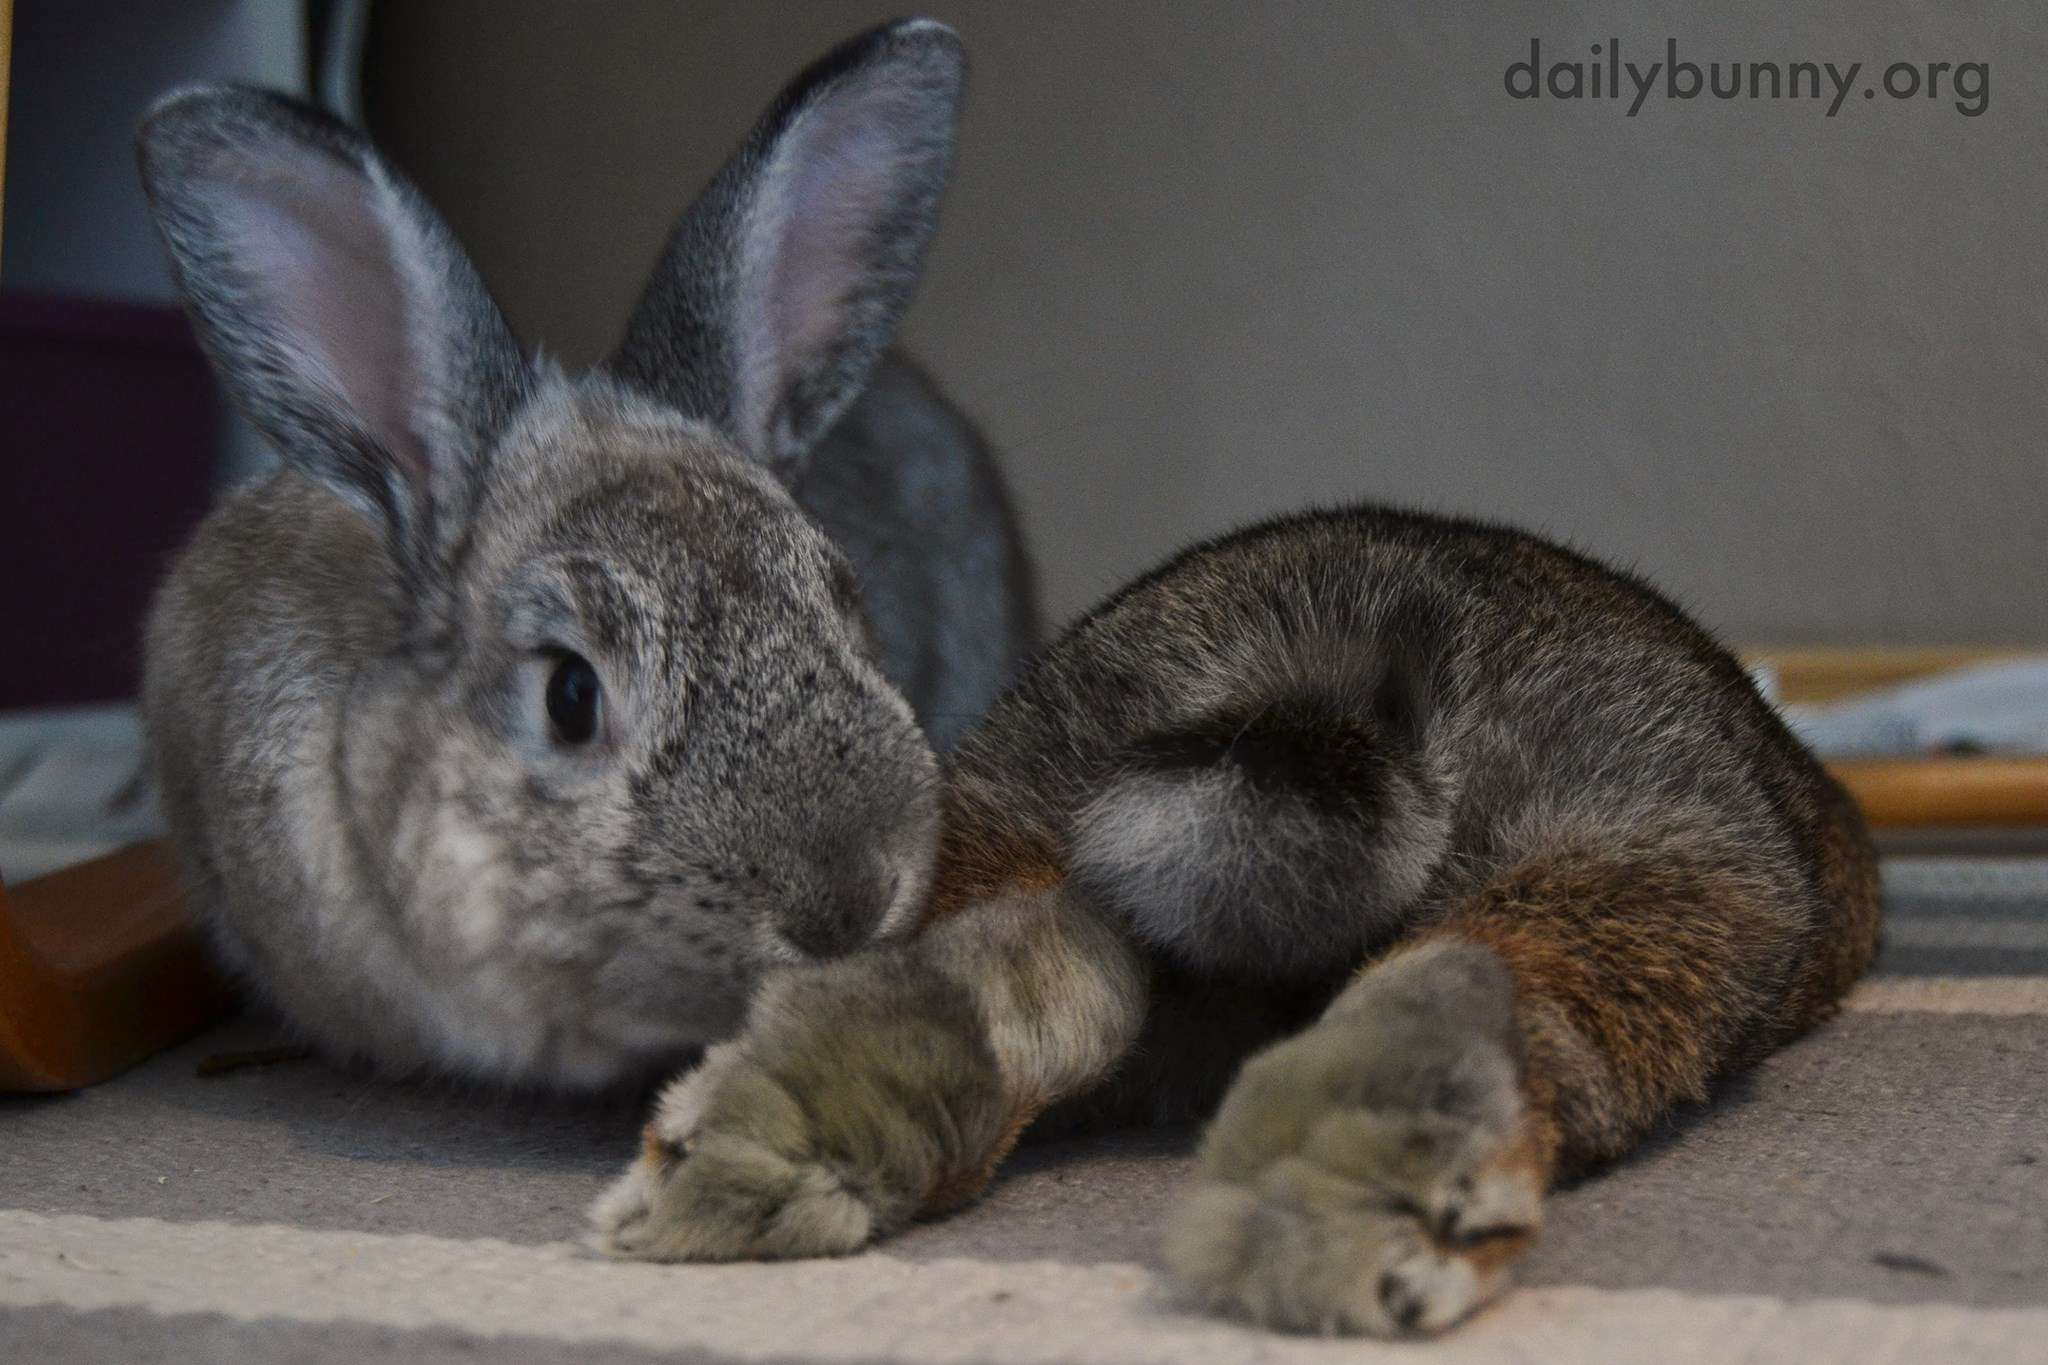 Your Feet Smell Good - Have You Been Stepping on the Parsley Again?